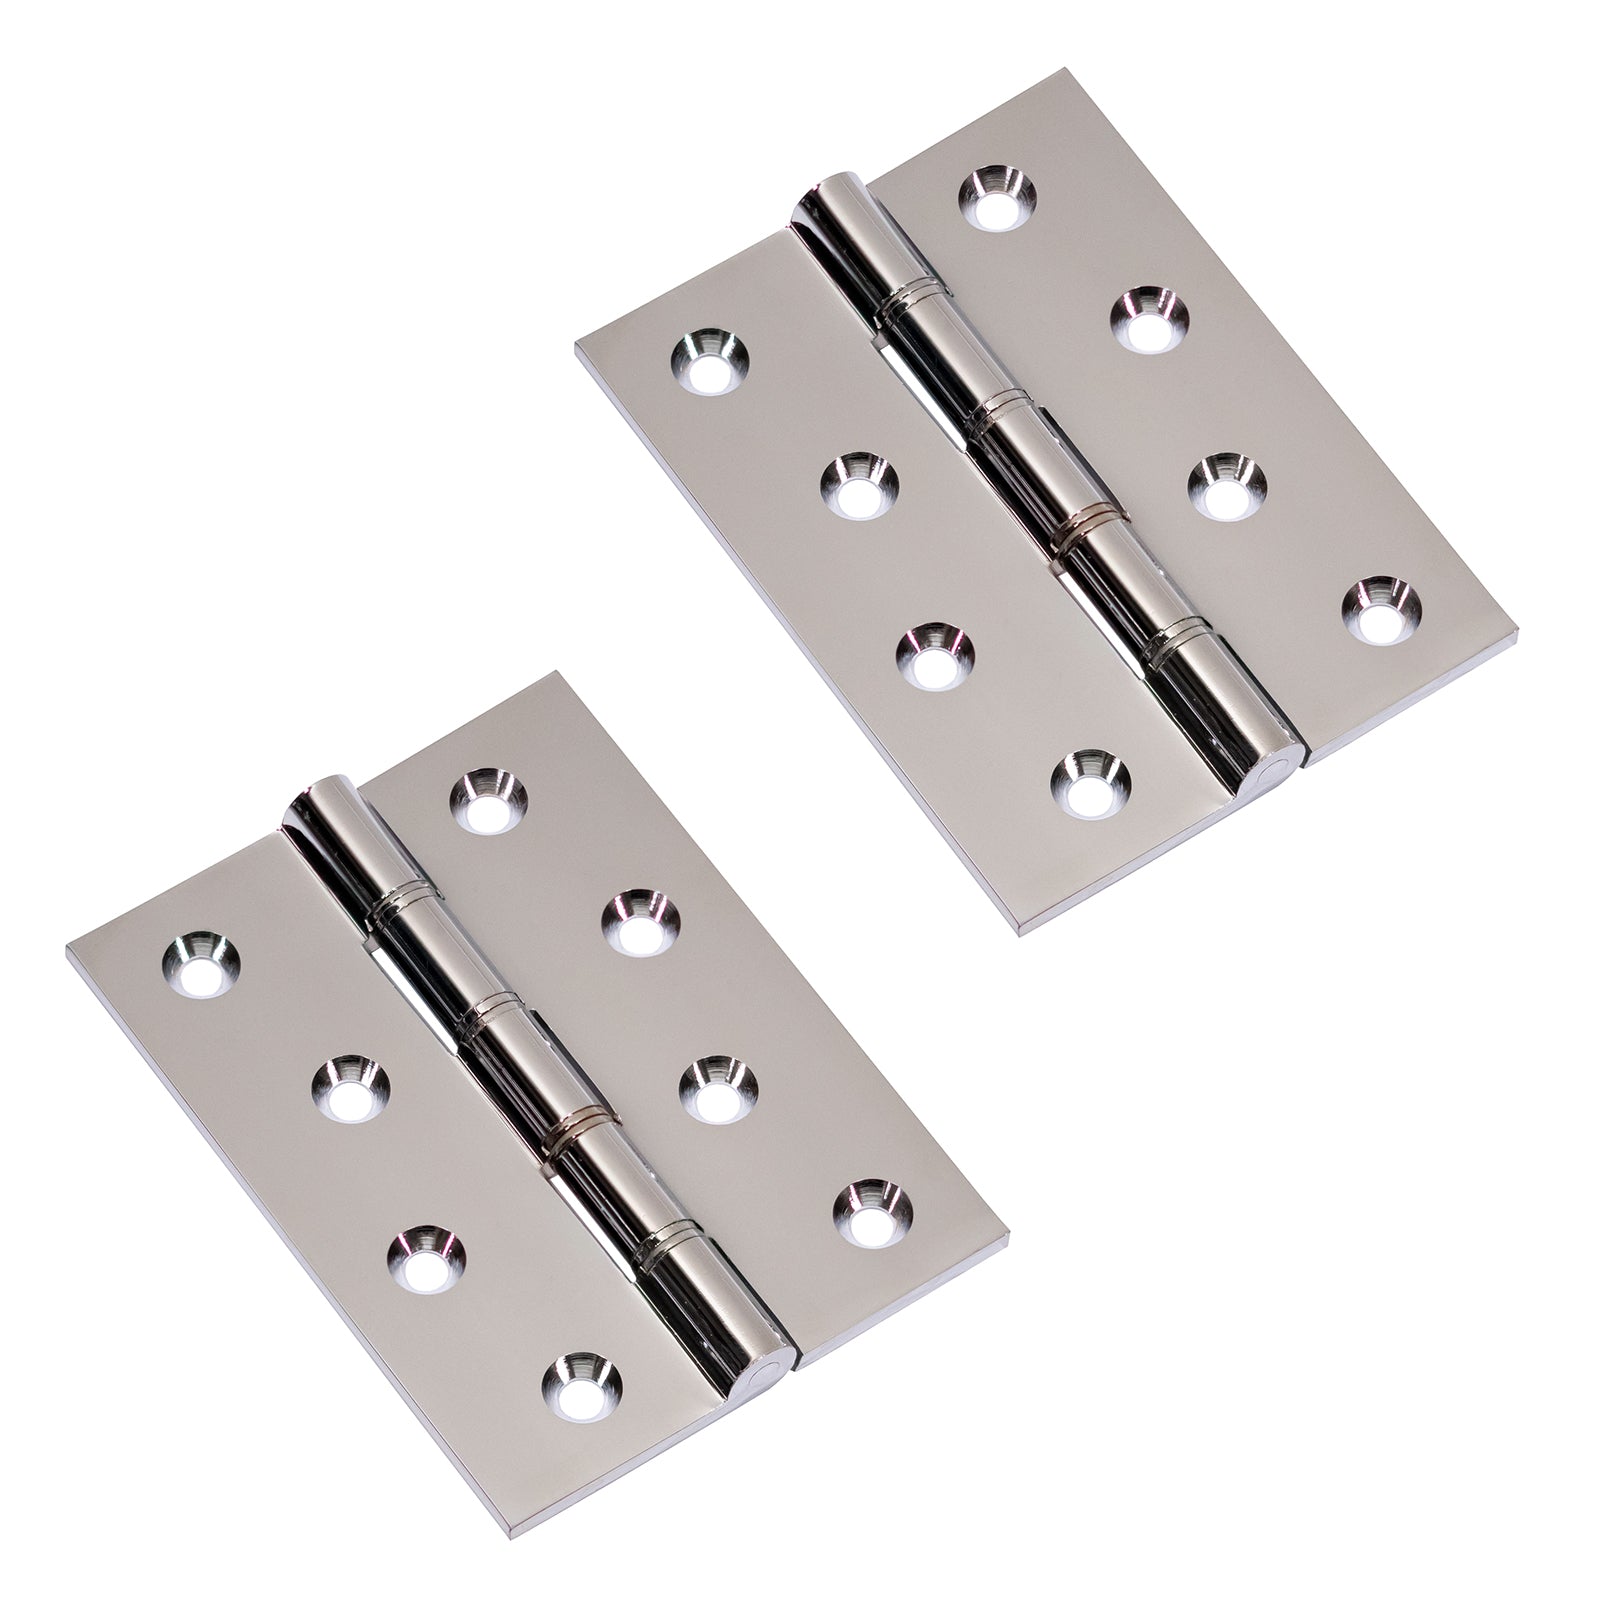 Solid Brass 4 Inch Butt Hinge in Polished Chrome Finish